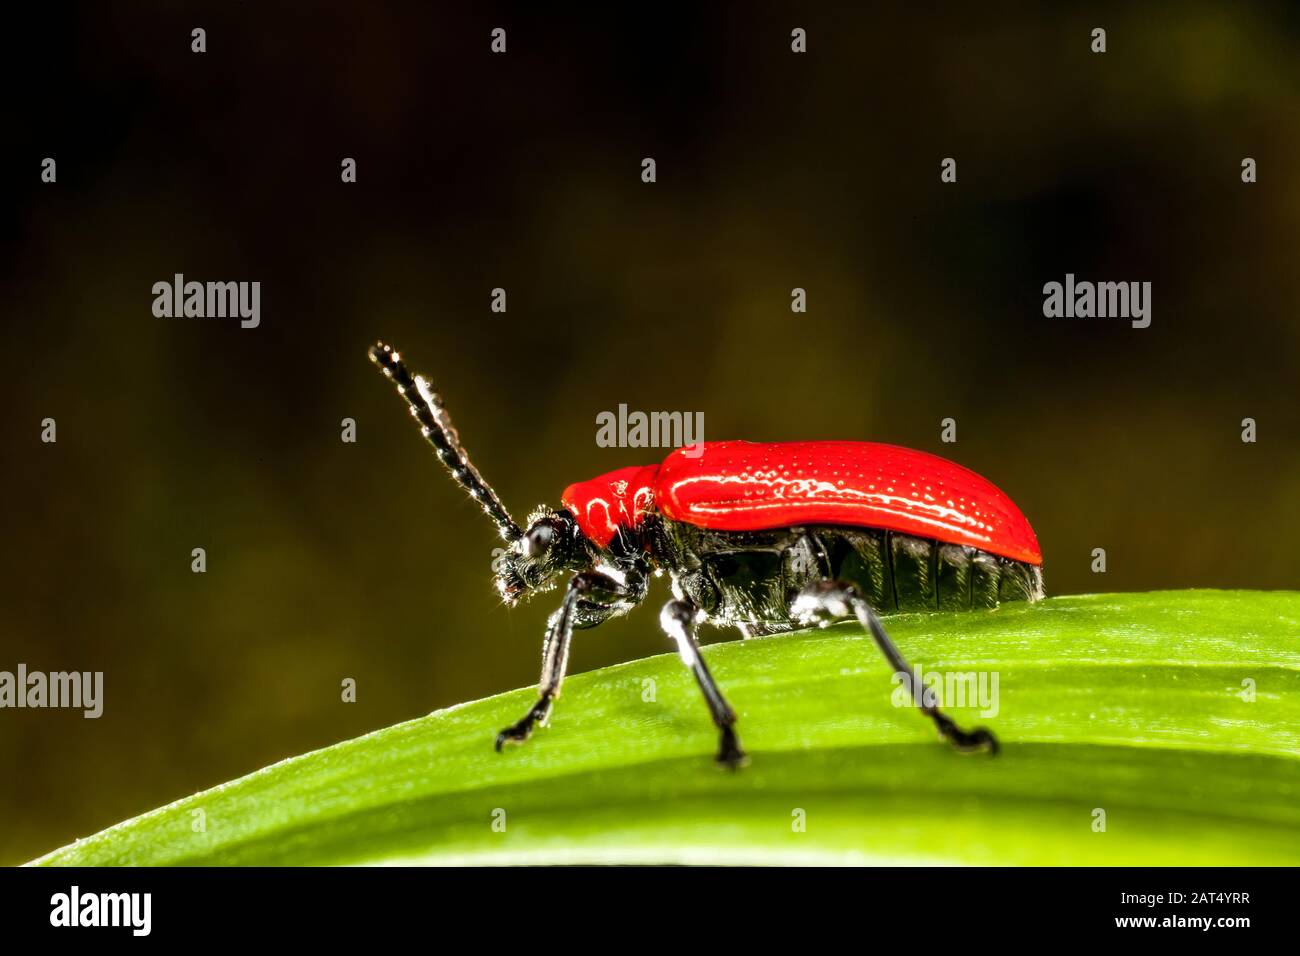 Scarlet lily beetles seen on lily leaves. They are a pest affecting lilies and fritillaries and cause holes in the leaves leading to defoliation. Stock Photo